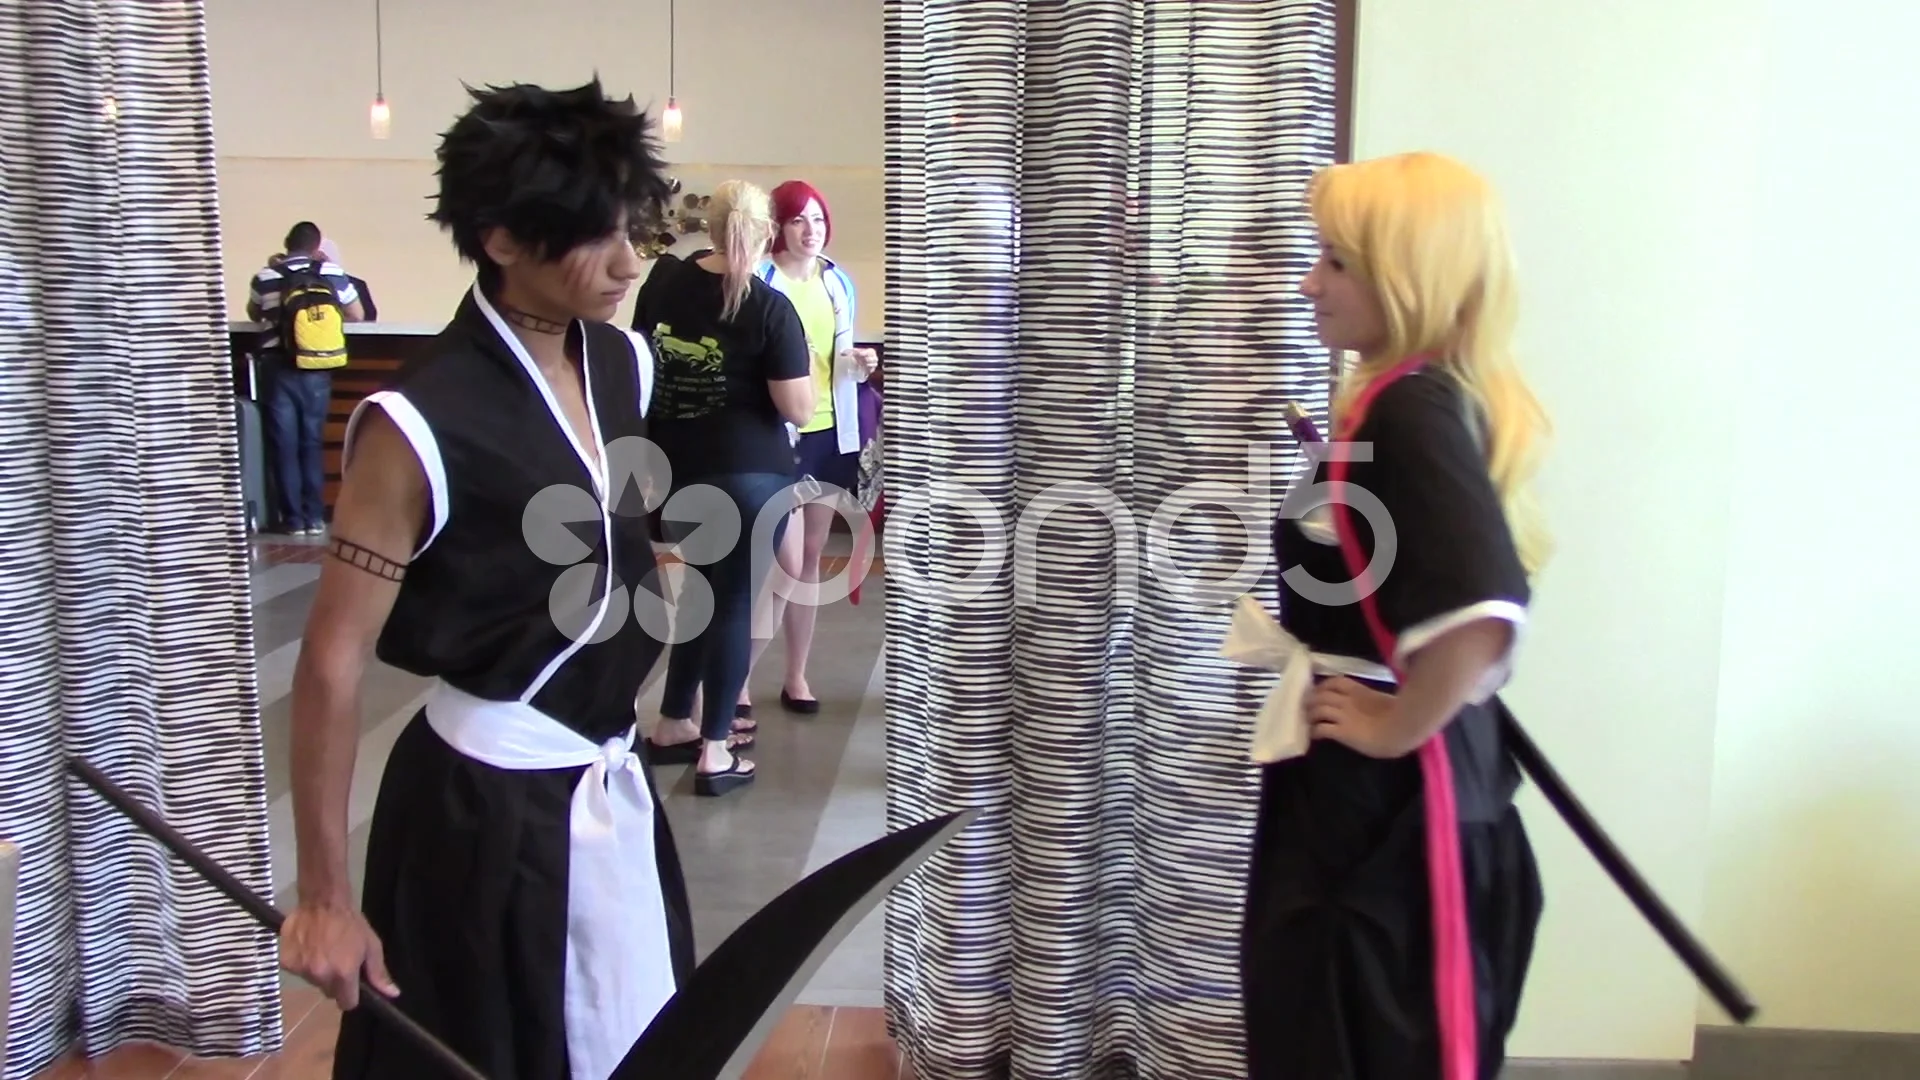 The South West's largest anime & gaming convention is back